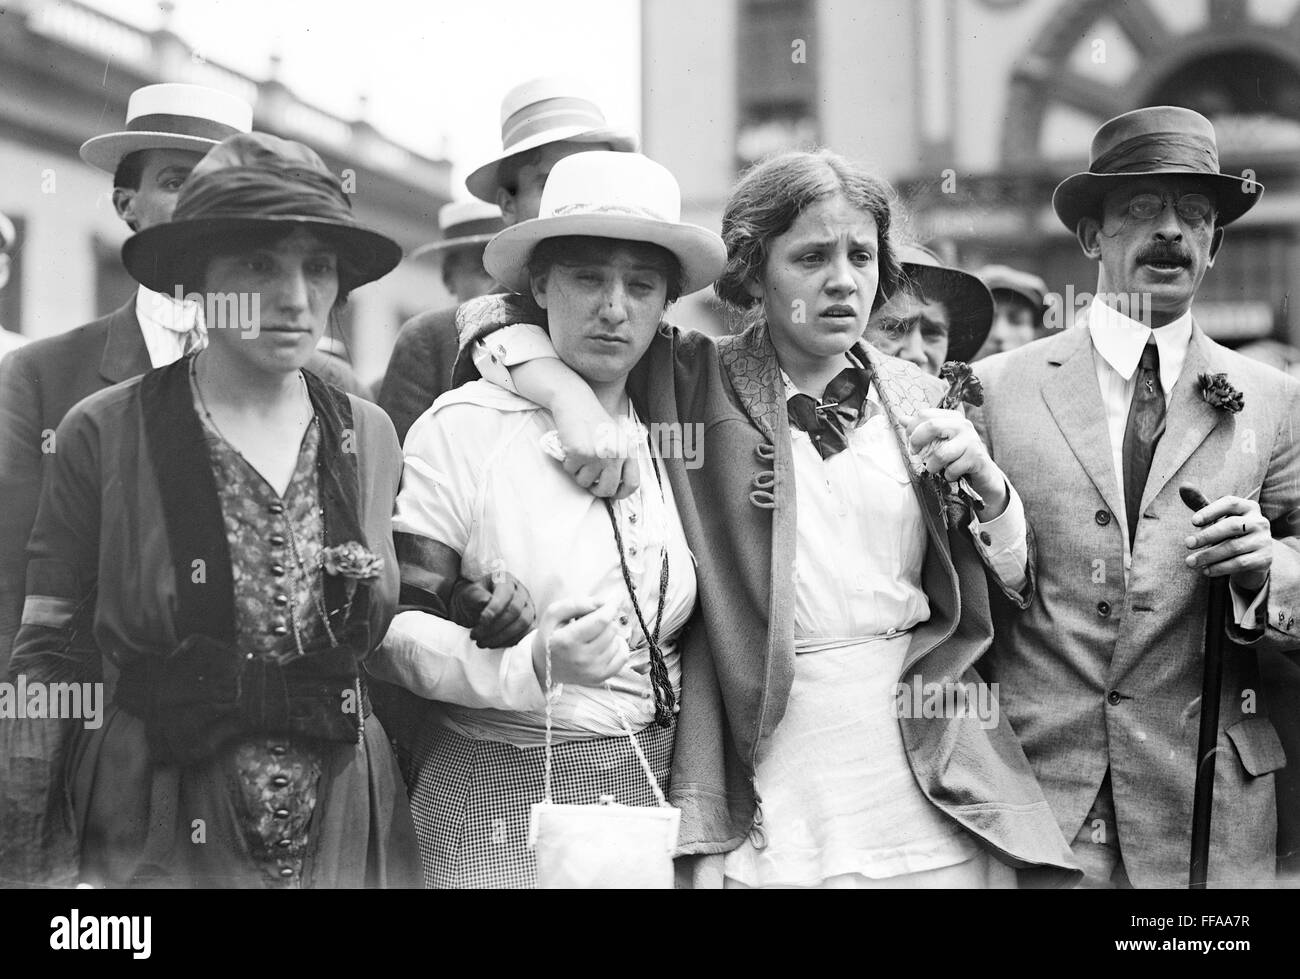 AMERICAN ANARCHISTS From left: Lillian Rubel, Becky Edelson, Louise Berger, Alexander Berkman about 1914. Photo Bain News Service Stock Photo